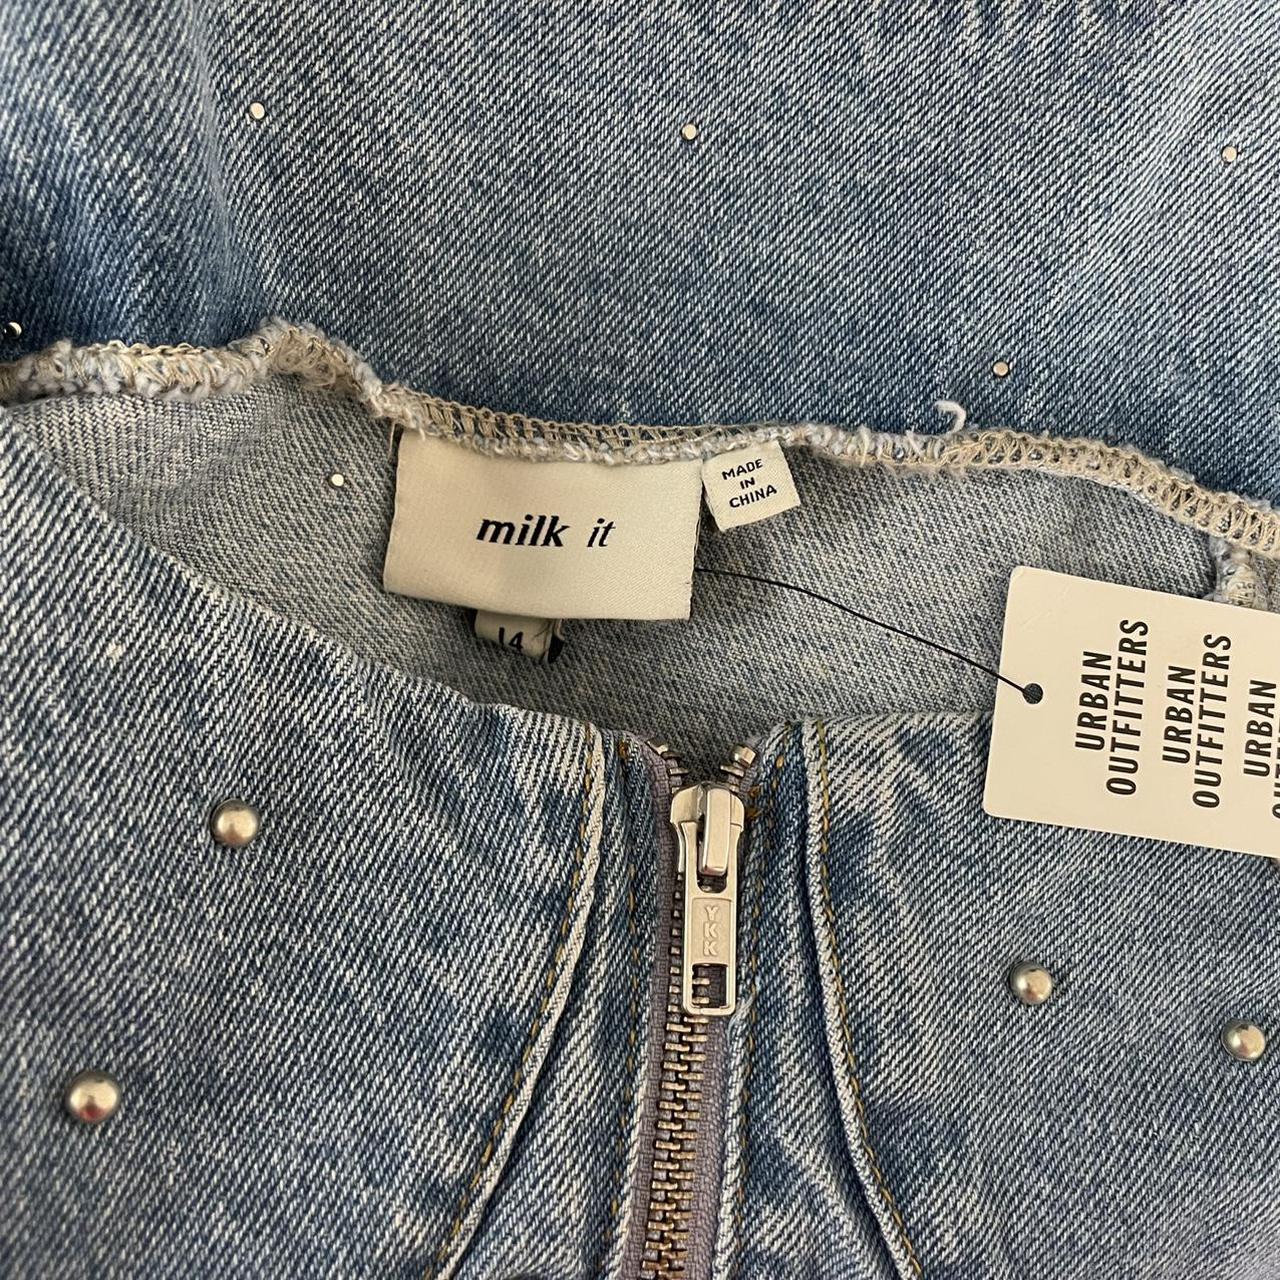 Product Image 4 - Urban Outfitters Milk It Denim